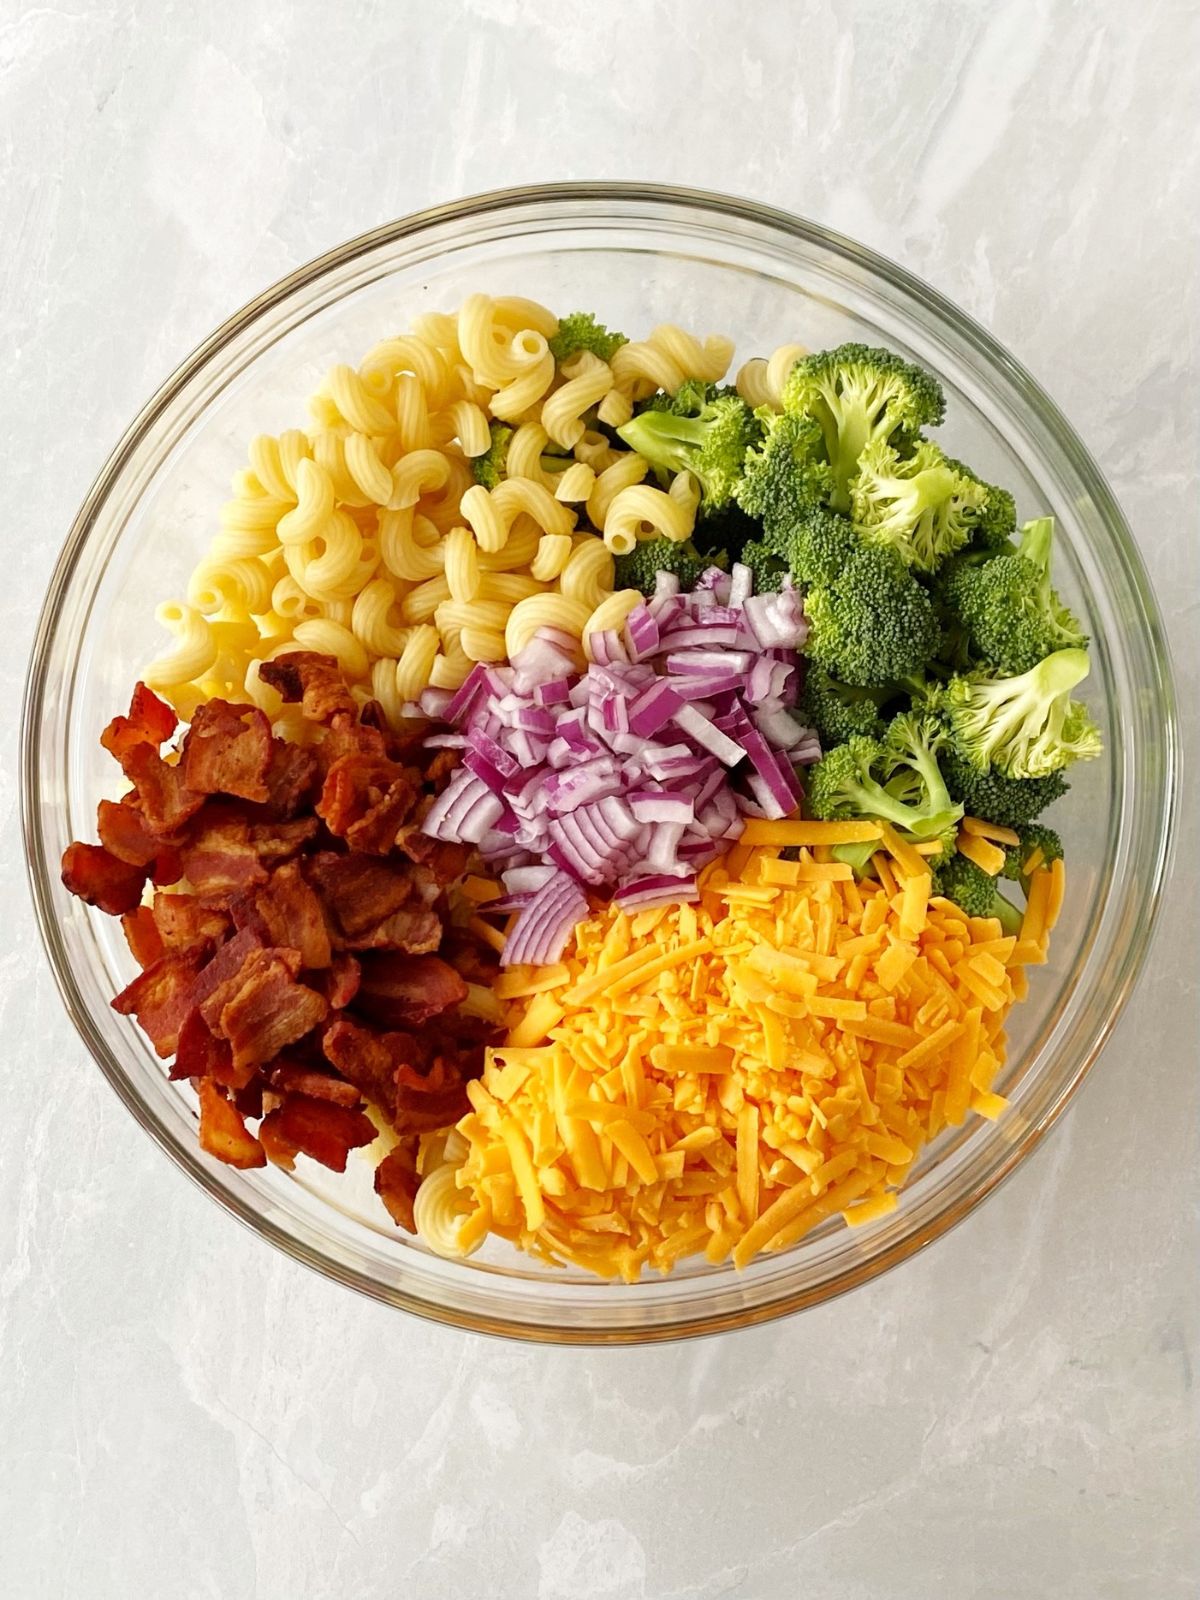 combine salad ingredients in a mixing bowl.